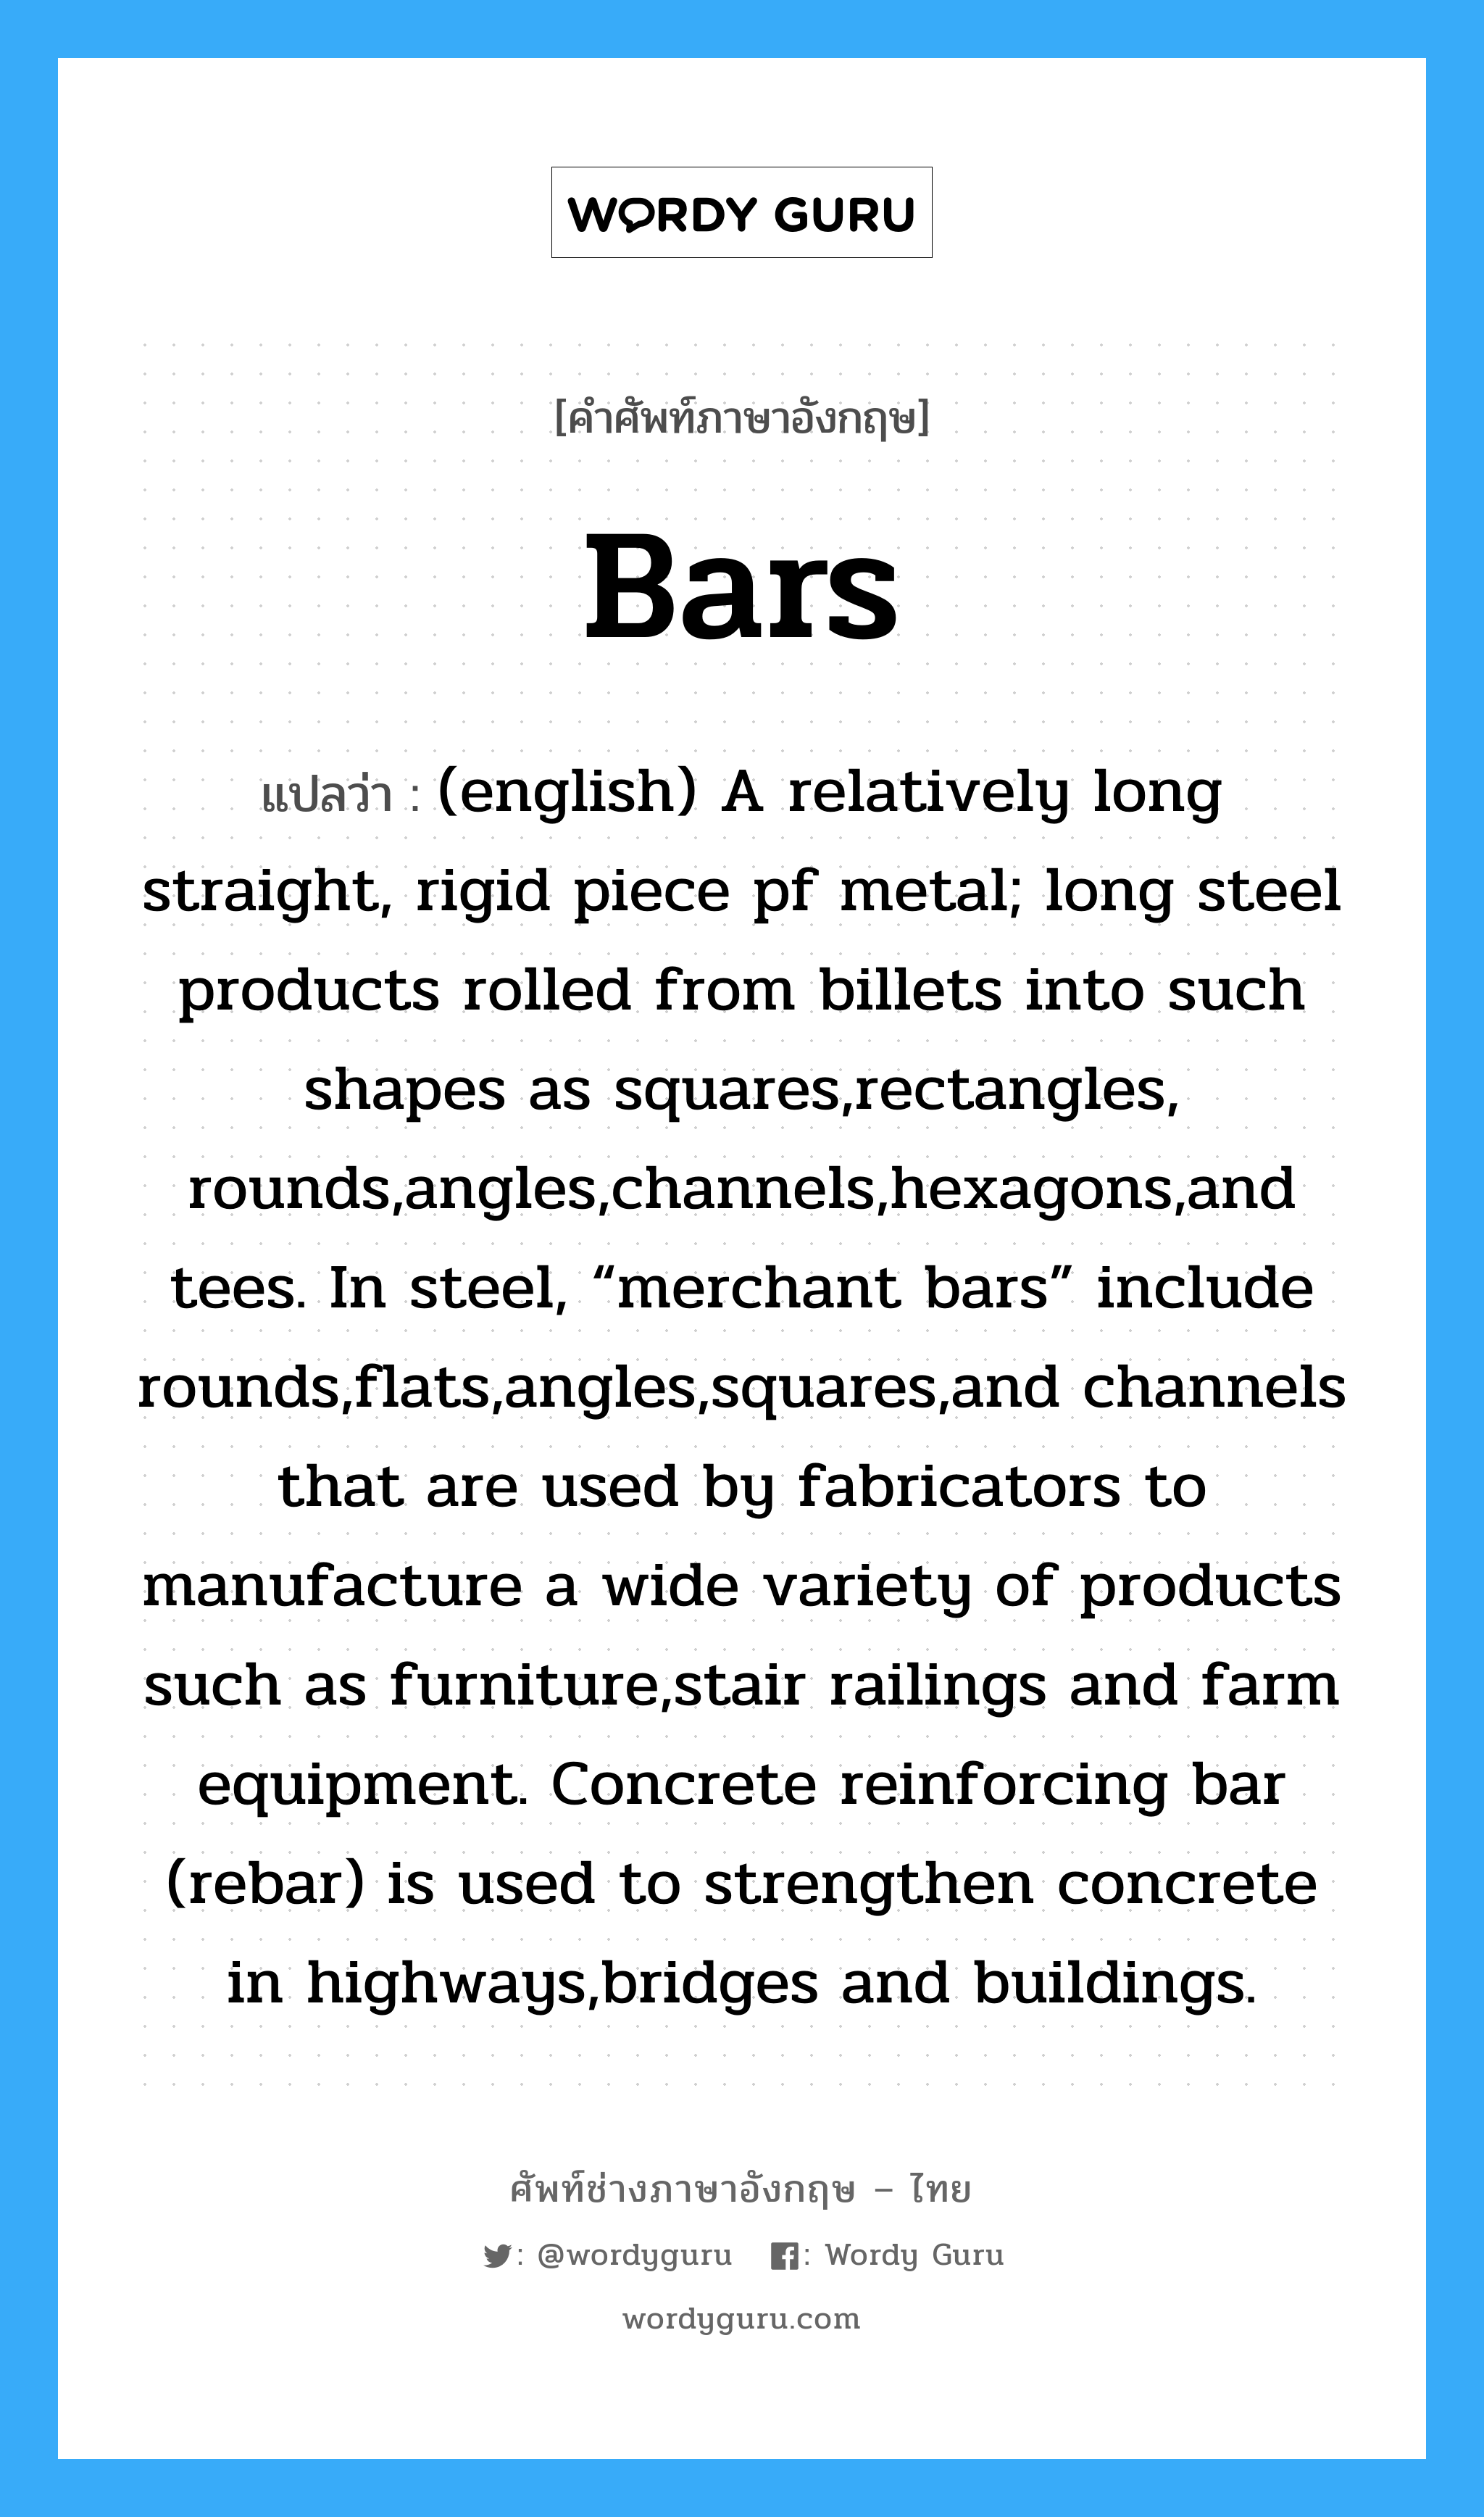 Bars แปลว่า?, คำศัพท์ช่างภาษาอังกฤษ - ไทย Bars คำศัพท์ภาษาอังกฤษ Bars แปลว่า (english) A relatively long straight, rigid piece pf metal; long steel products rolled from billets into such shapes as squares,rectangles, rounds,angles,channels,hexagons,and tees. In steel, “merchant bars” include rounds,flats,angles,squares,and channels that are used by fabricators to manufacture a wide variety of products such as furniture,stair railings and farm equipment. Concrete reinforcing bar (rebar) is used to strengthen concrete in highways,bridges and buildings.